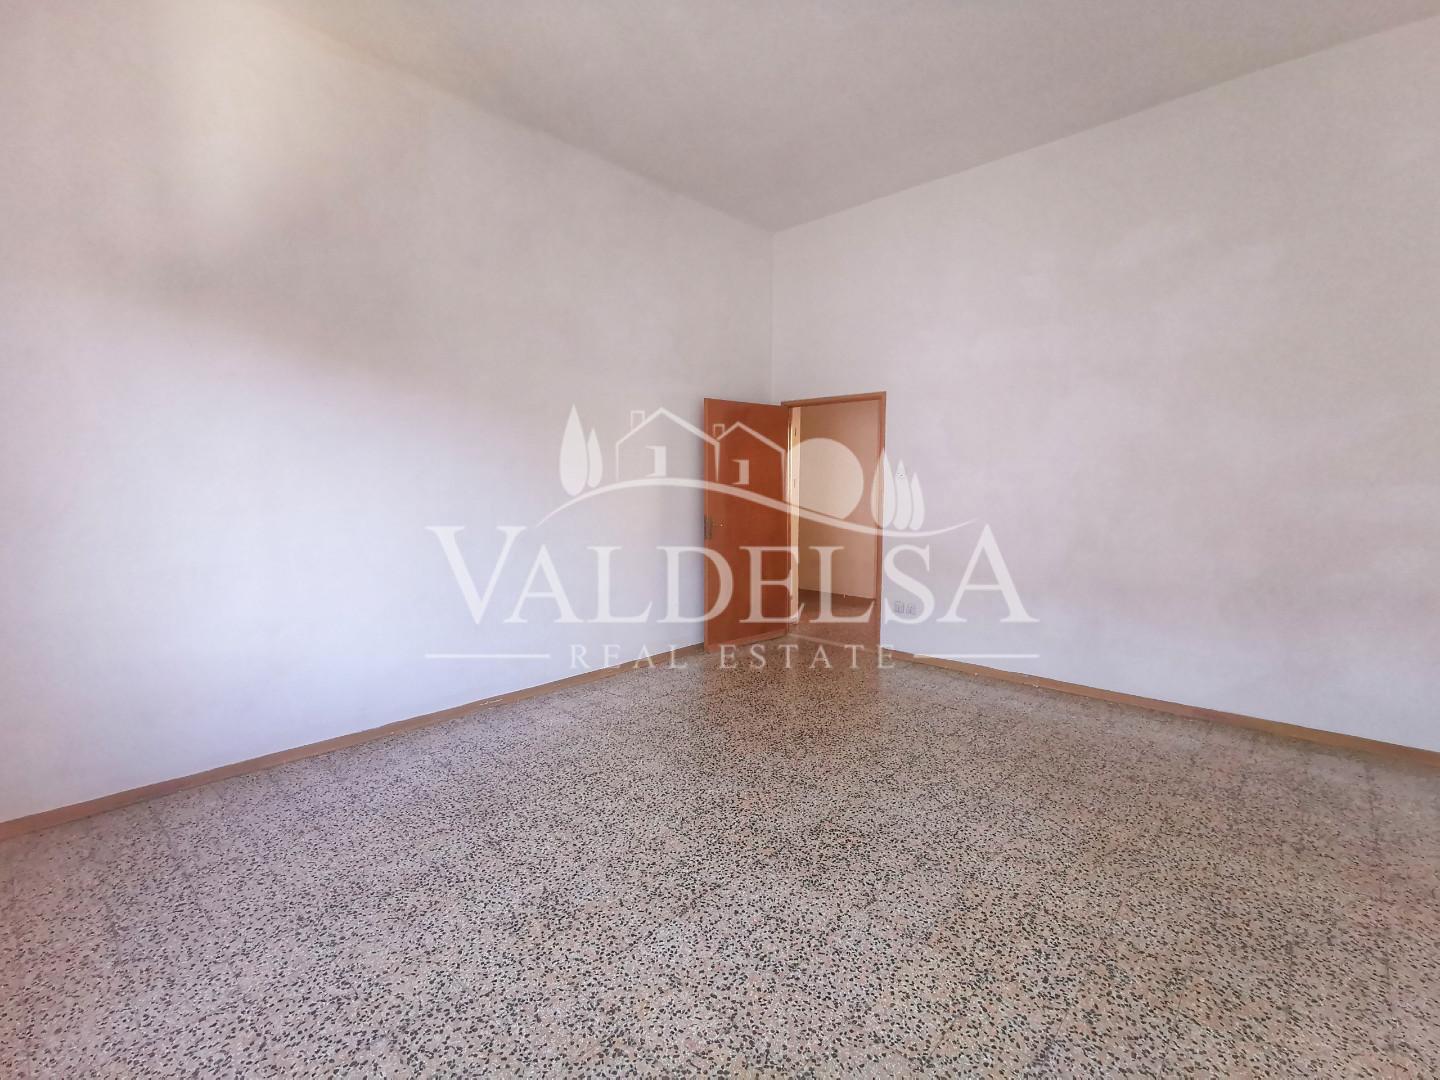 Apartment for sale, ref. 617